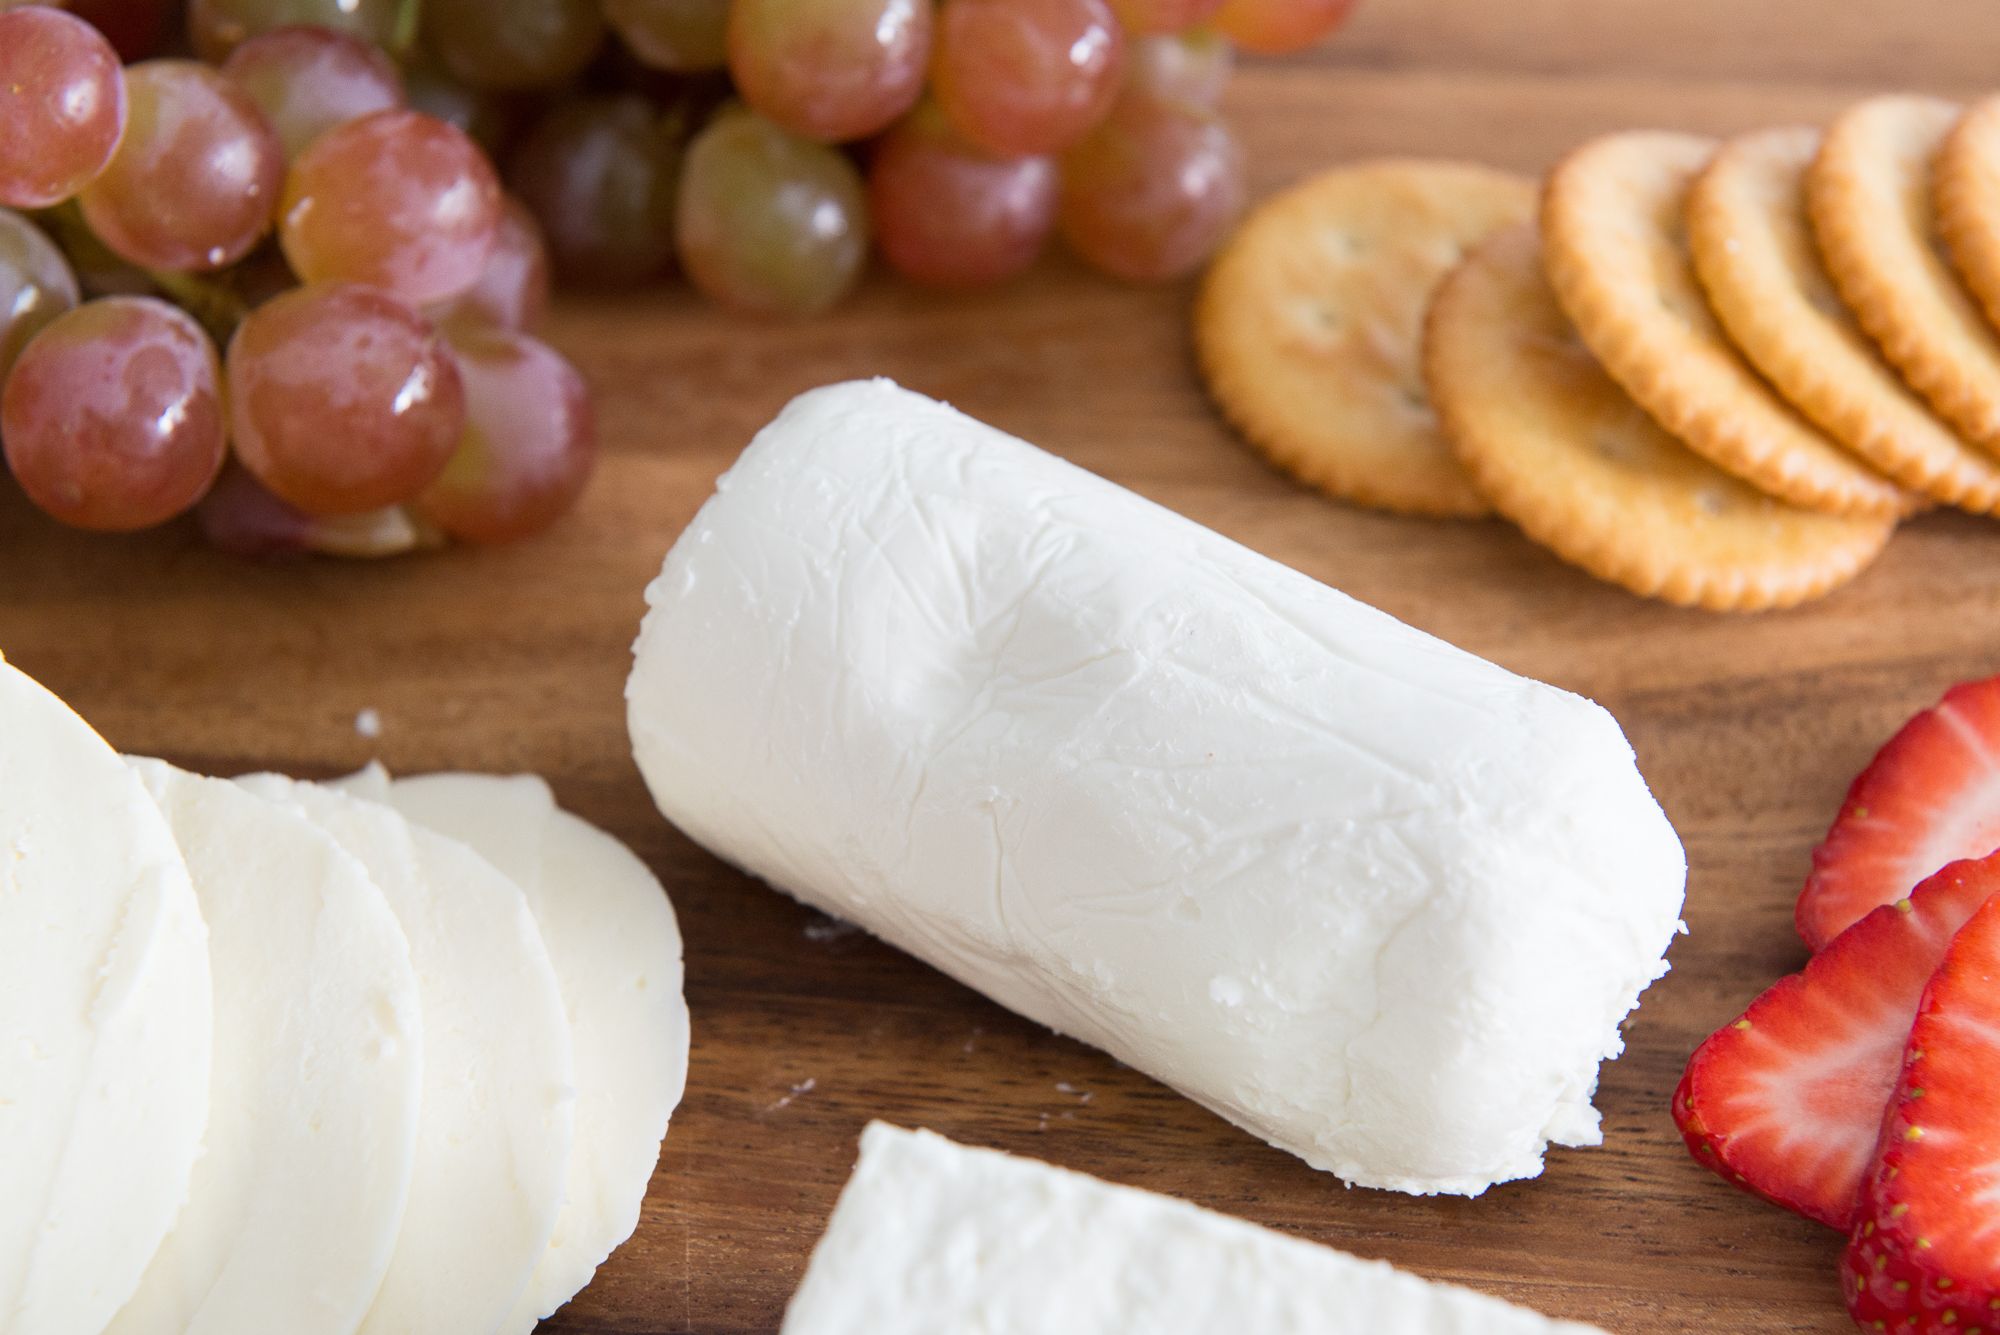 How Do You Open Cheese in Wax?